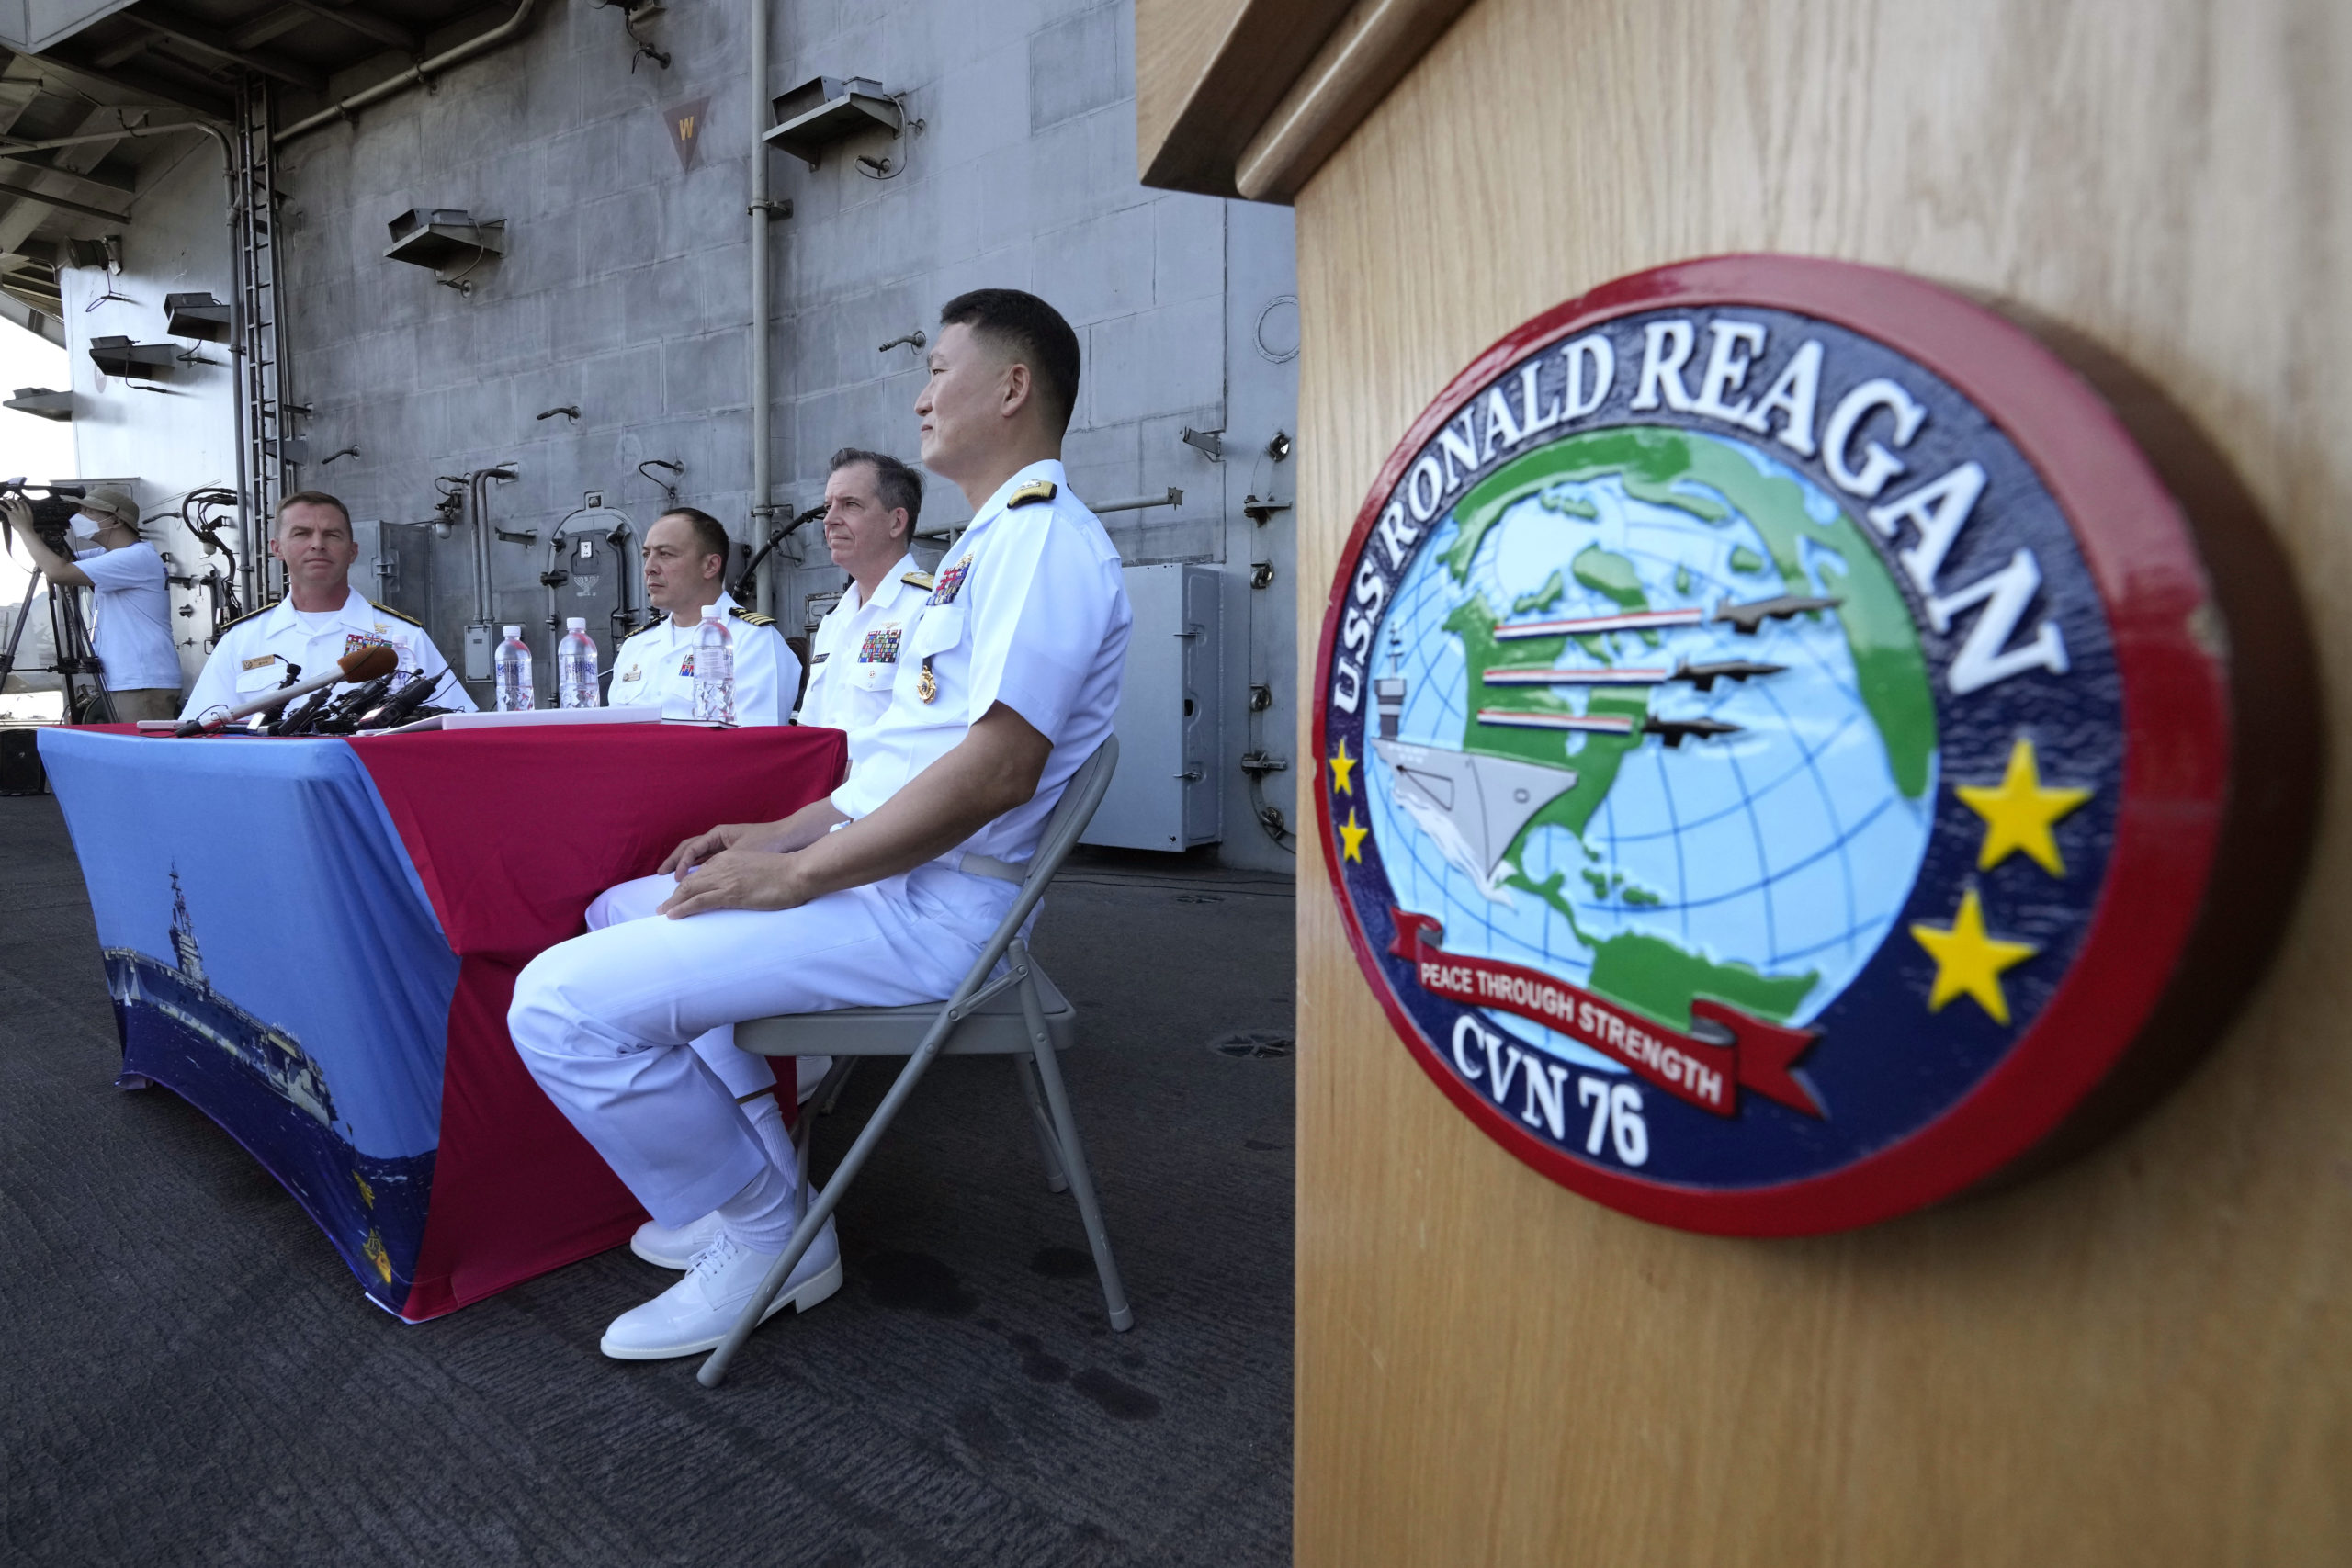 Rear Adm. Michael Donnelly, commander of the carrier strike group, second from right, listens to a reporter's question during a news conference on the deck of the nuclear-powered aircraft carrier USS Ronald Reagan in Busan, South Korea.